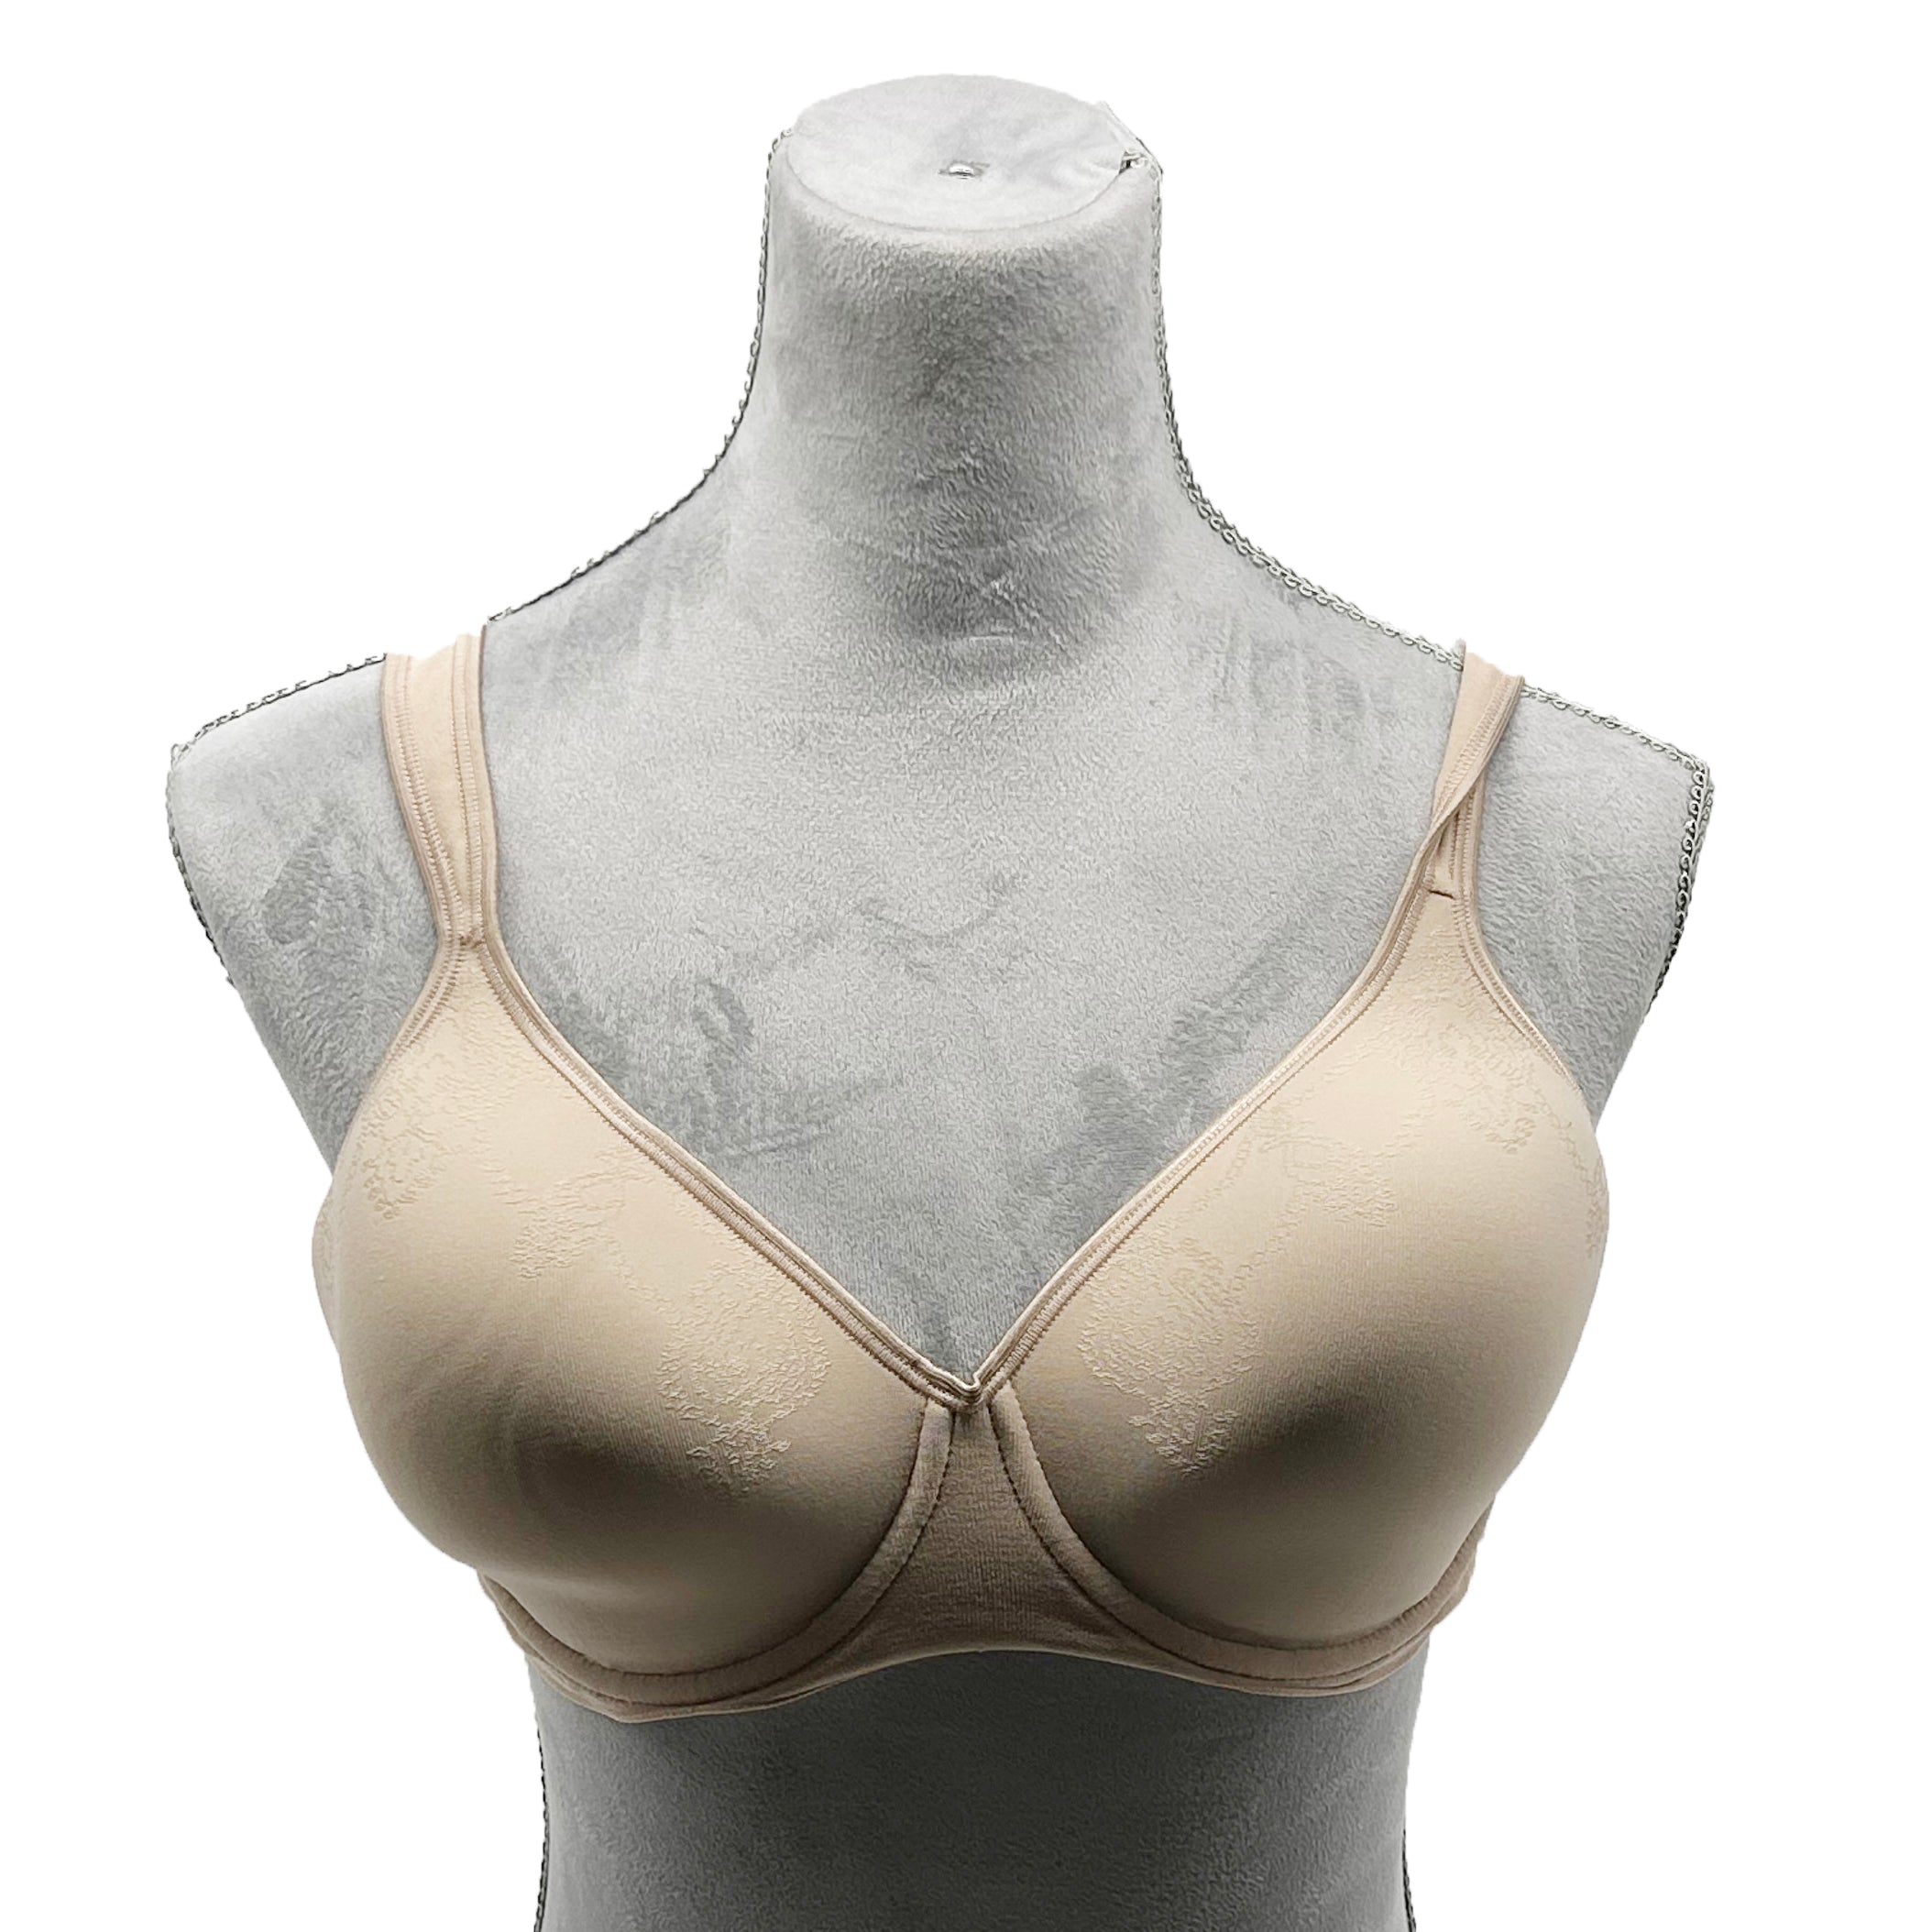 Bali Bra With Underwire Assorted Sizes Beige (no hangtags in clear